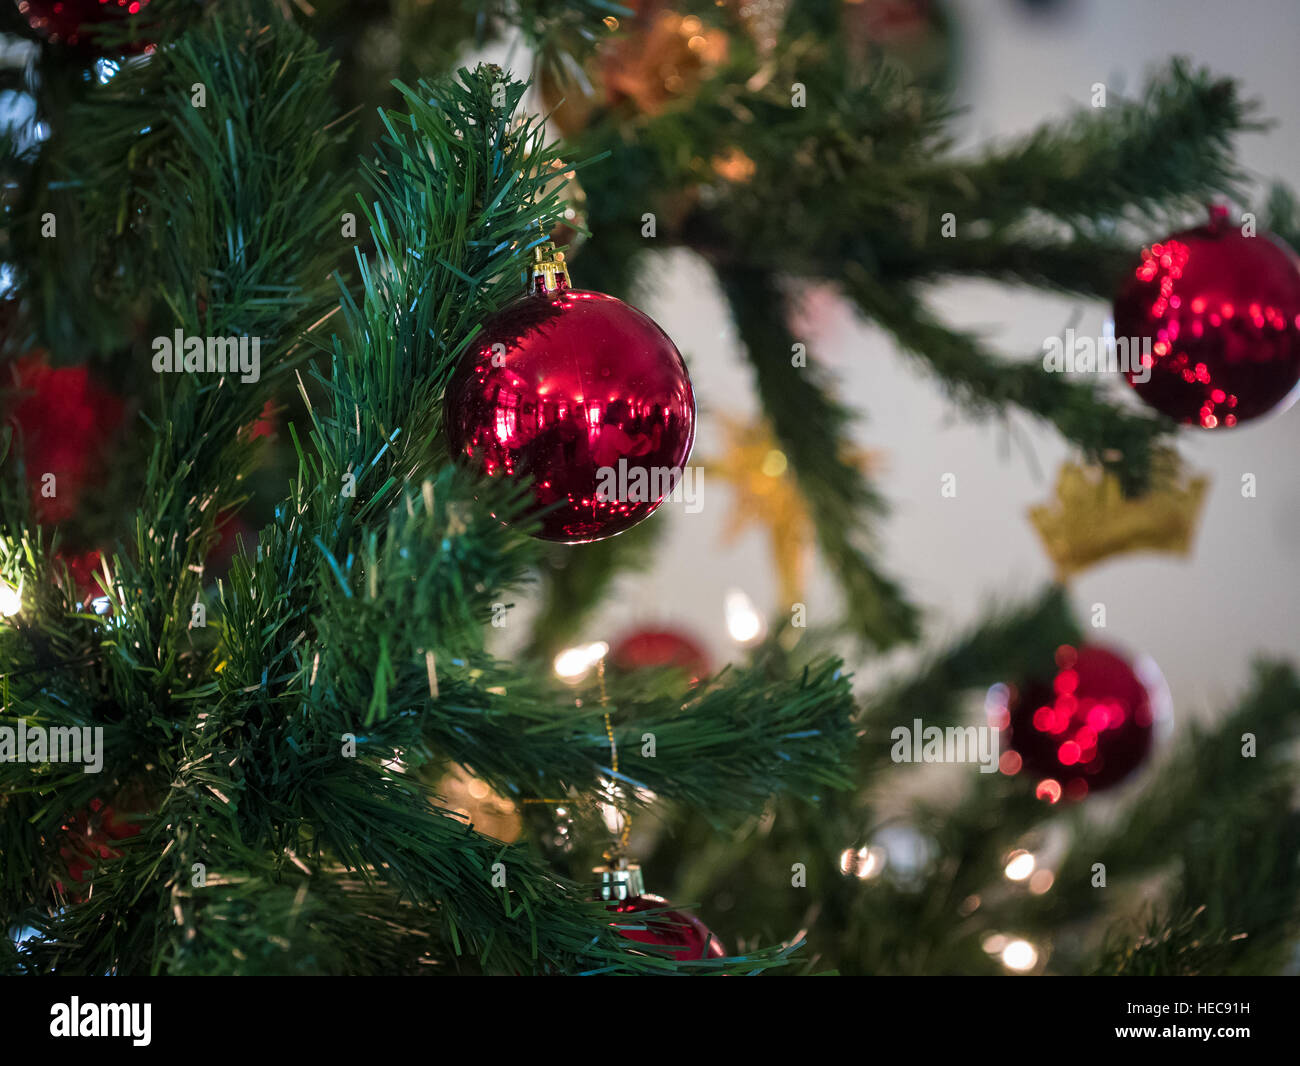 Closeup of red and silver ball hanging from a decorated Christmas tree Stock Photo